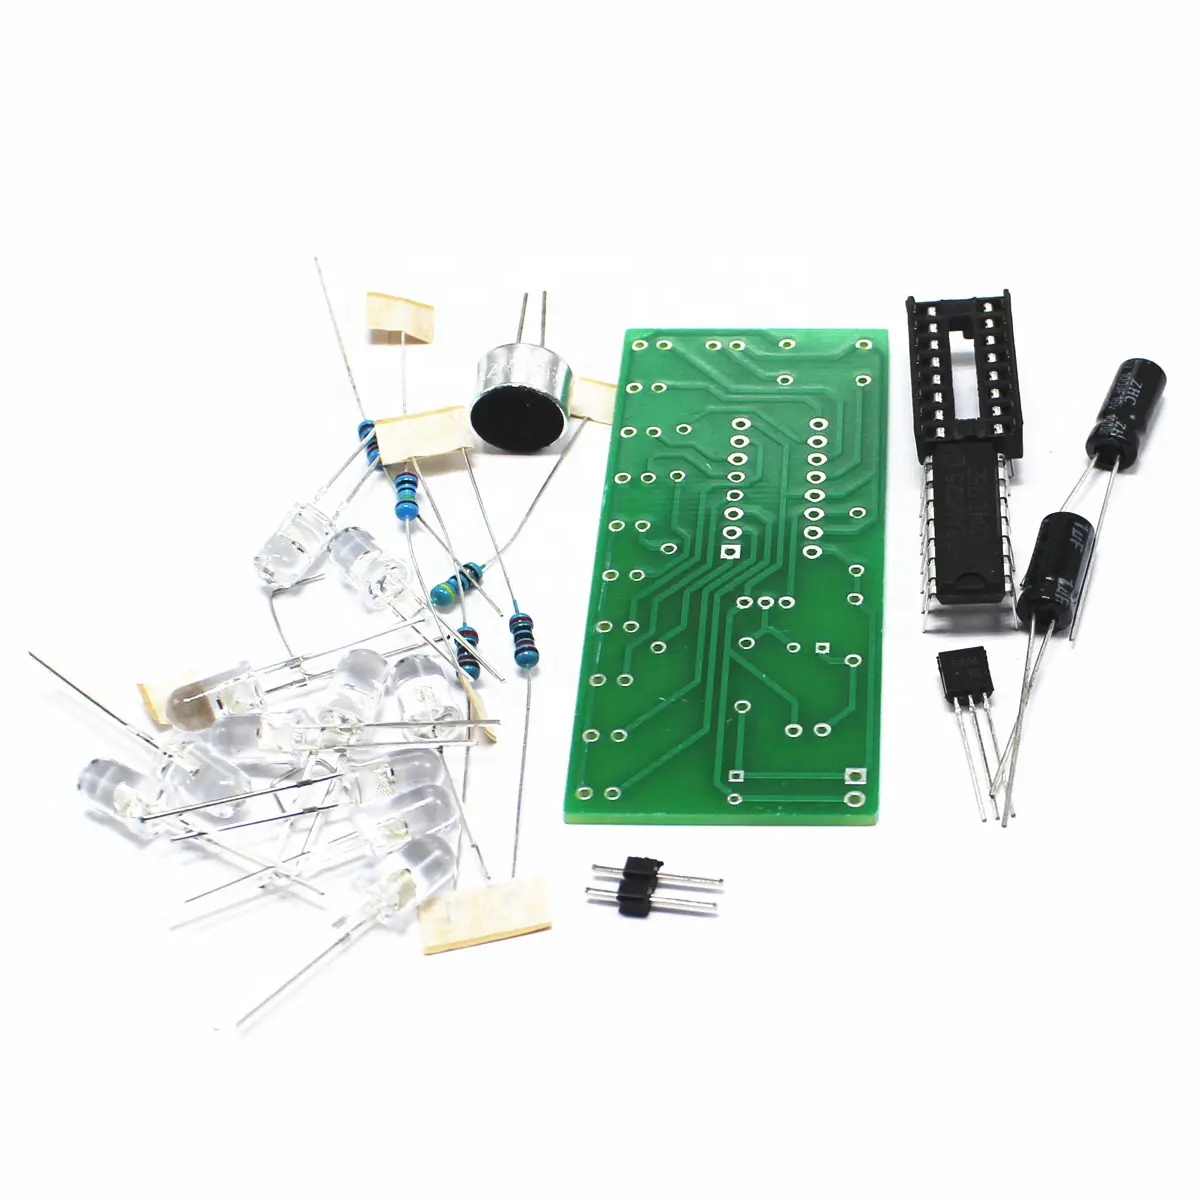 Taidacent CD4017 Educational Electronics Kit Voice-activated LED Light Part Colorful Light Control Kit Learn to Solder Kit